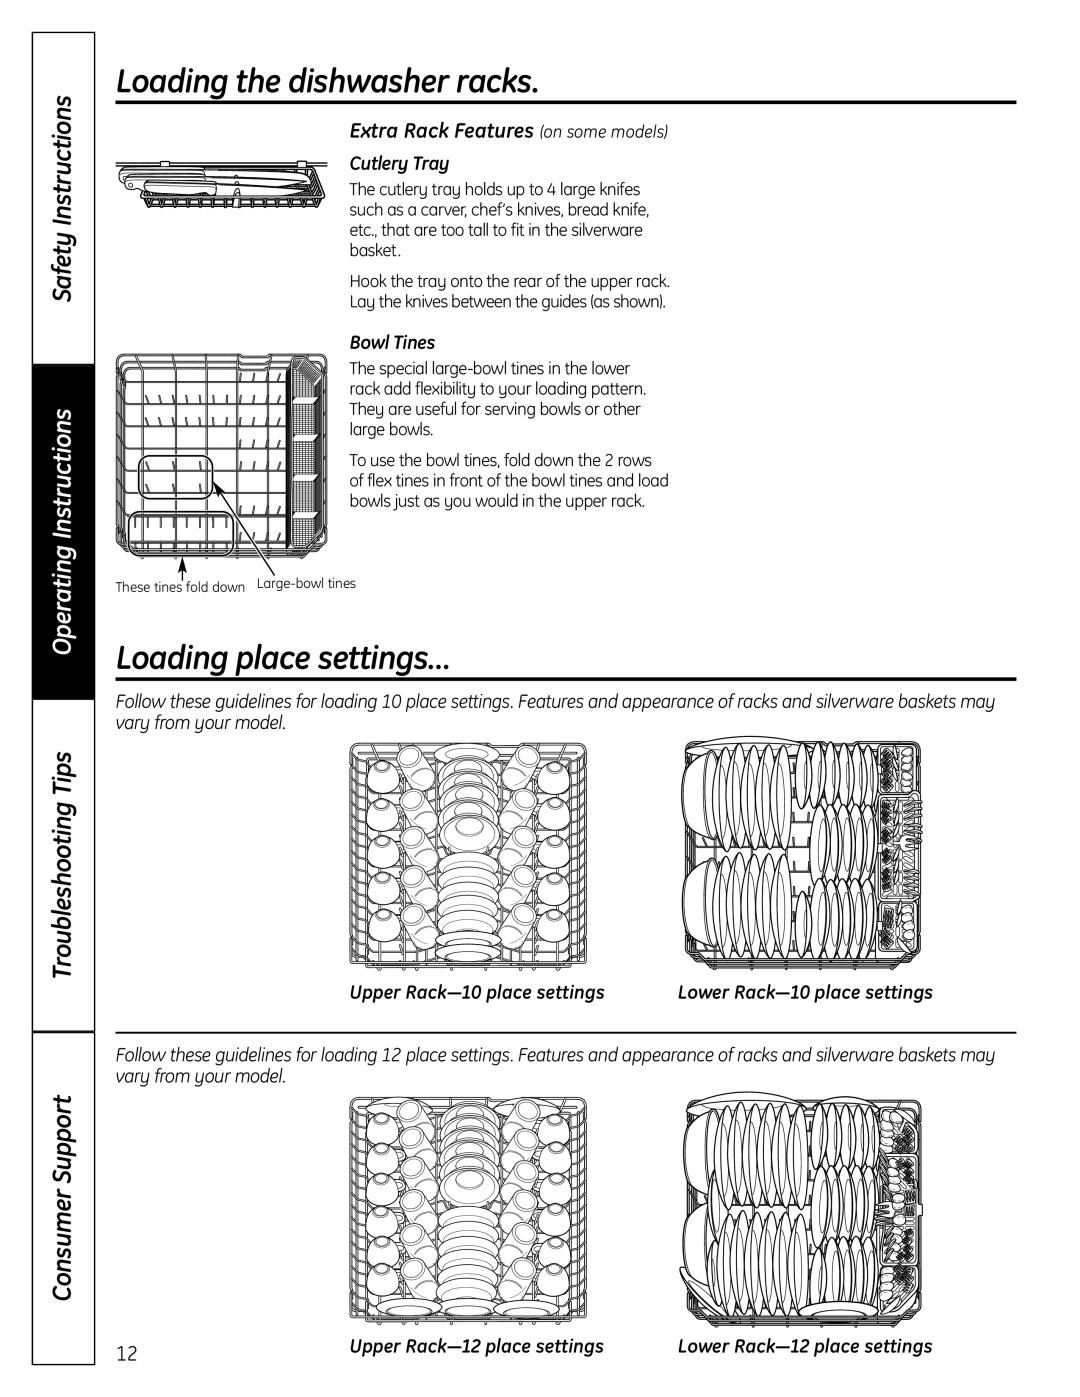 GE PDW 9200 Loading place settings…, Extra Rack Features on some models, Cutlery Tray, Bowl Tines, Safety Instructions 